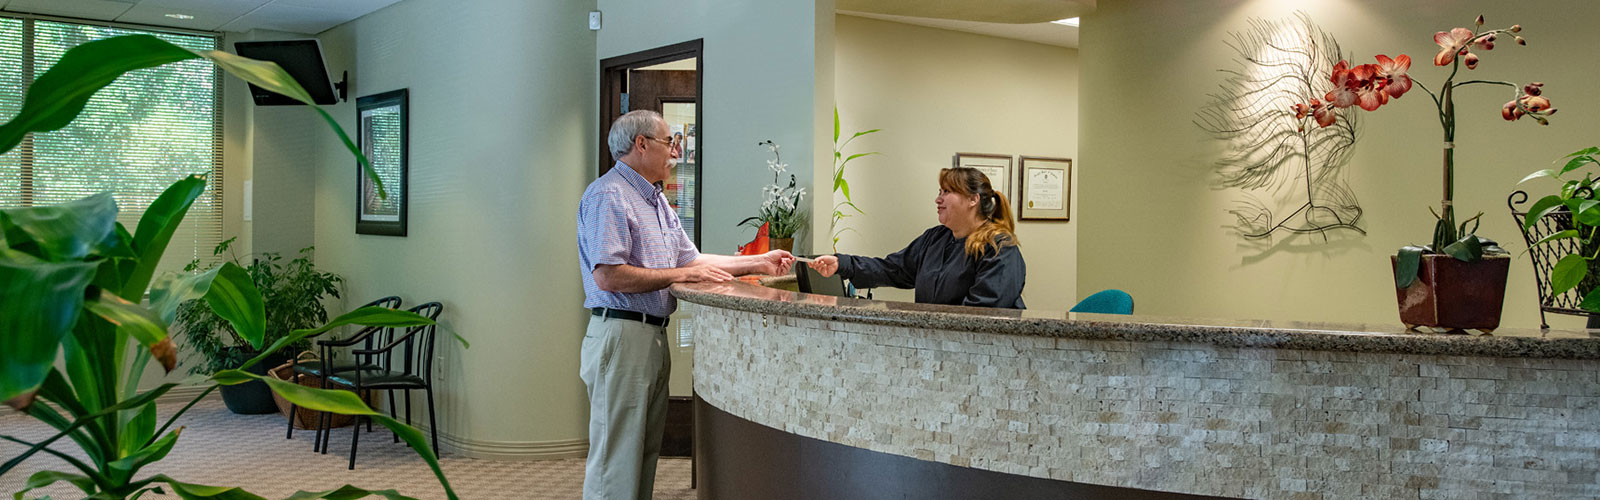 Bella Hanono Family Dentistry - front office staff talking to a patient